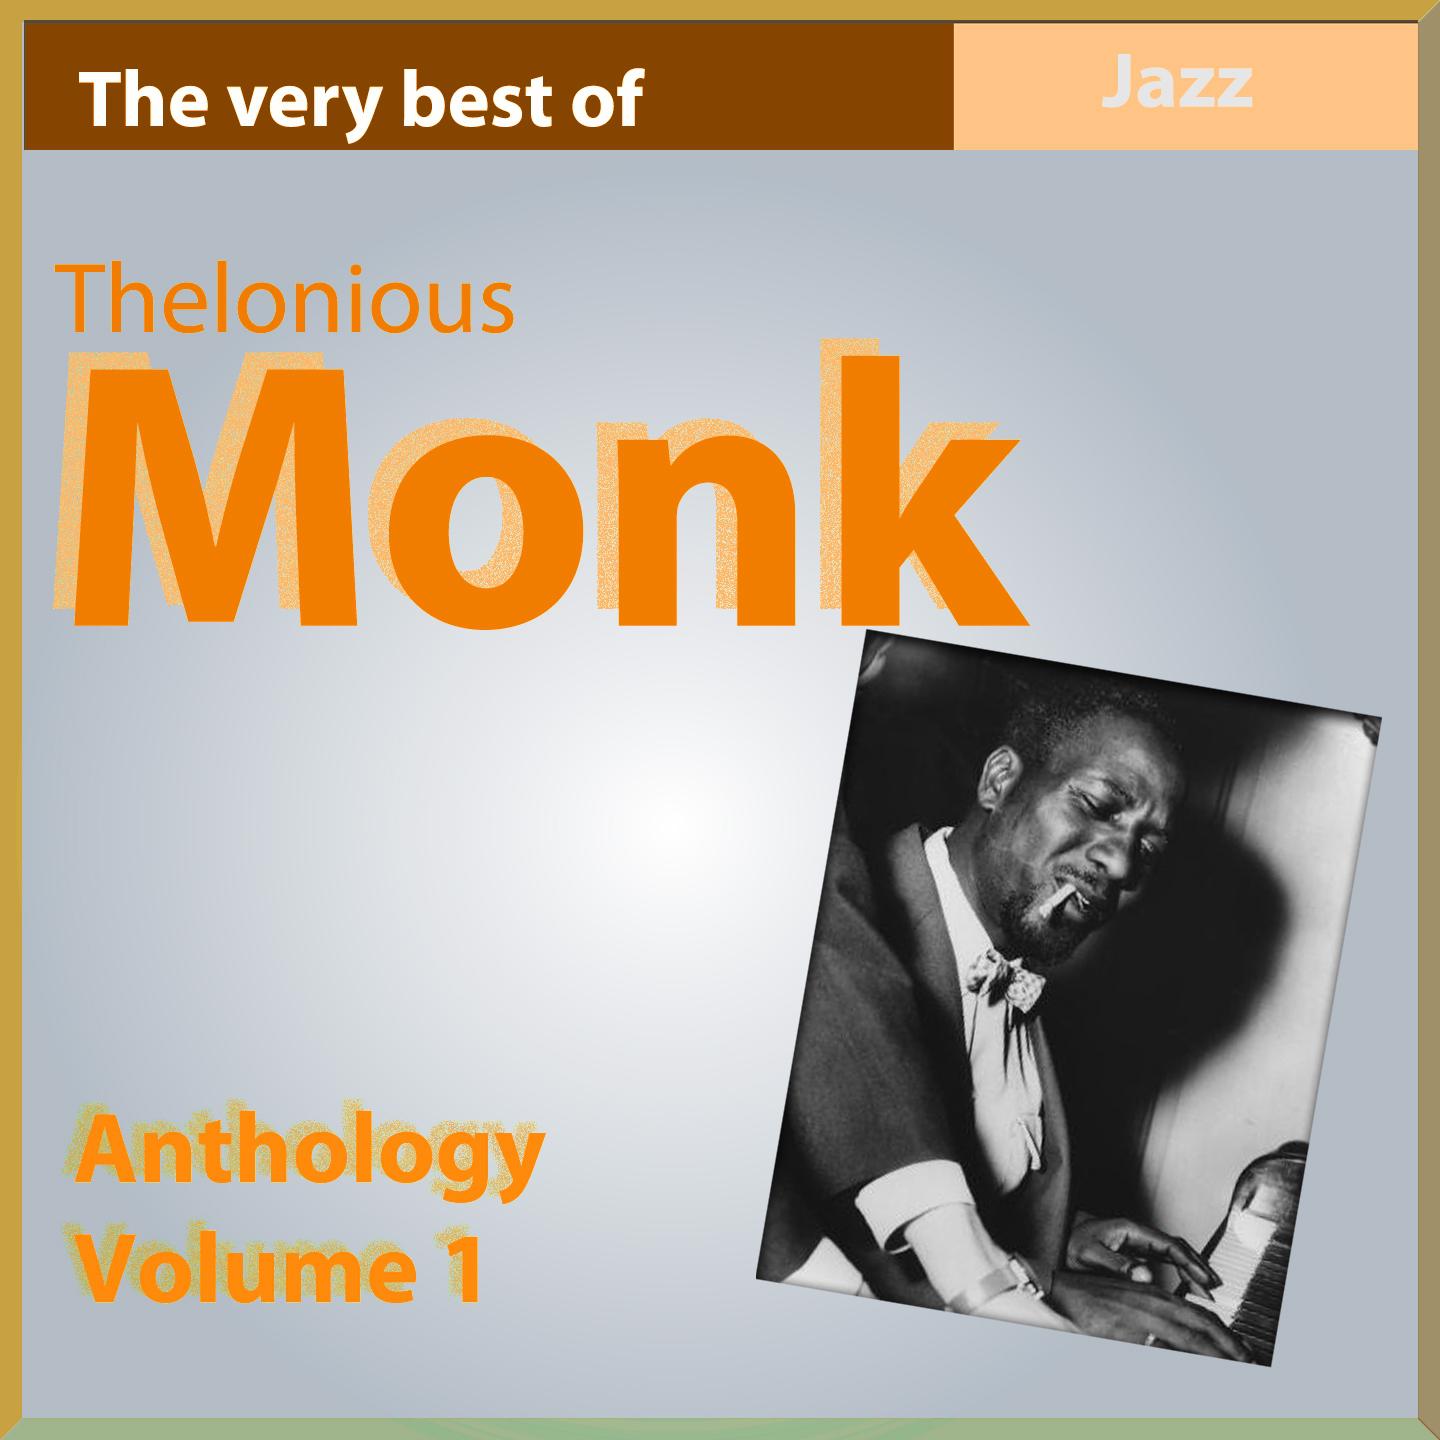 The Very Best of Thelonius Monk: Anthology, Vol. 1